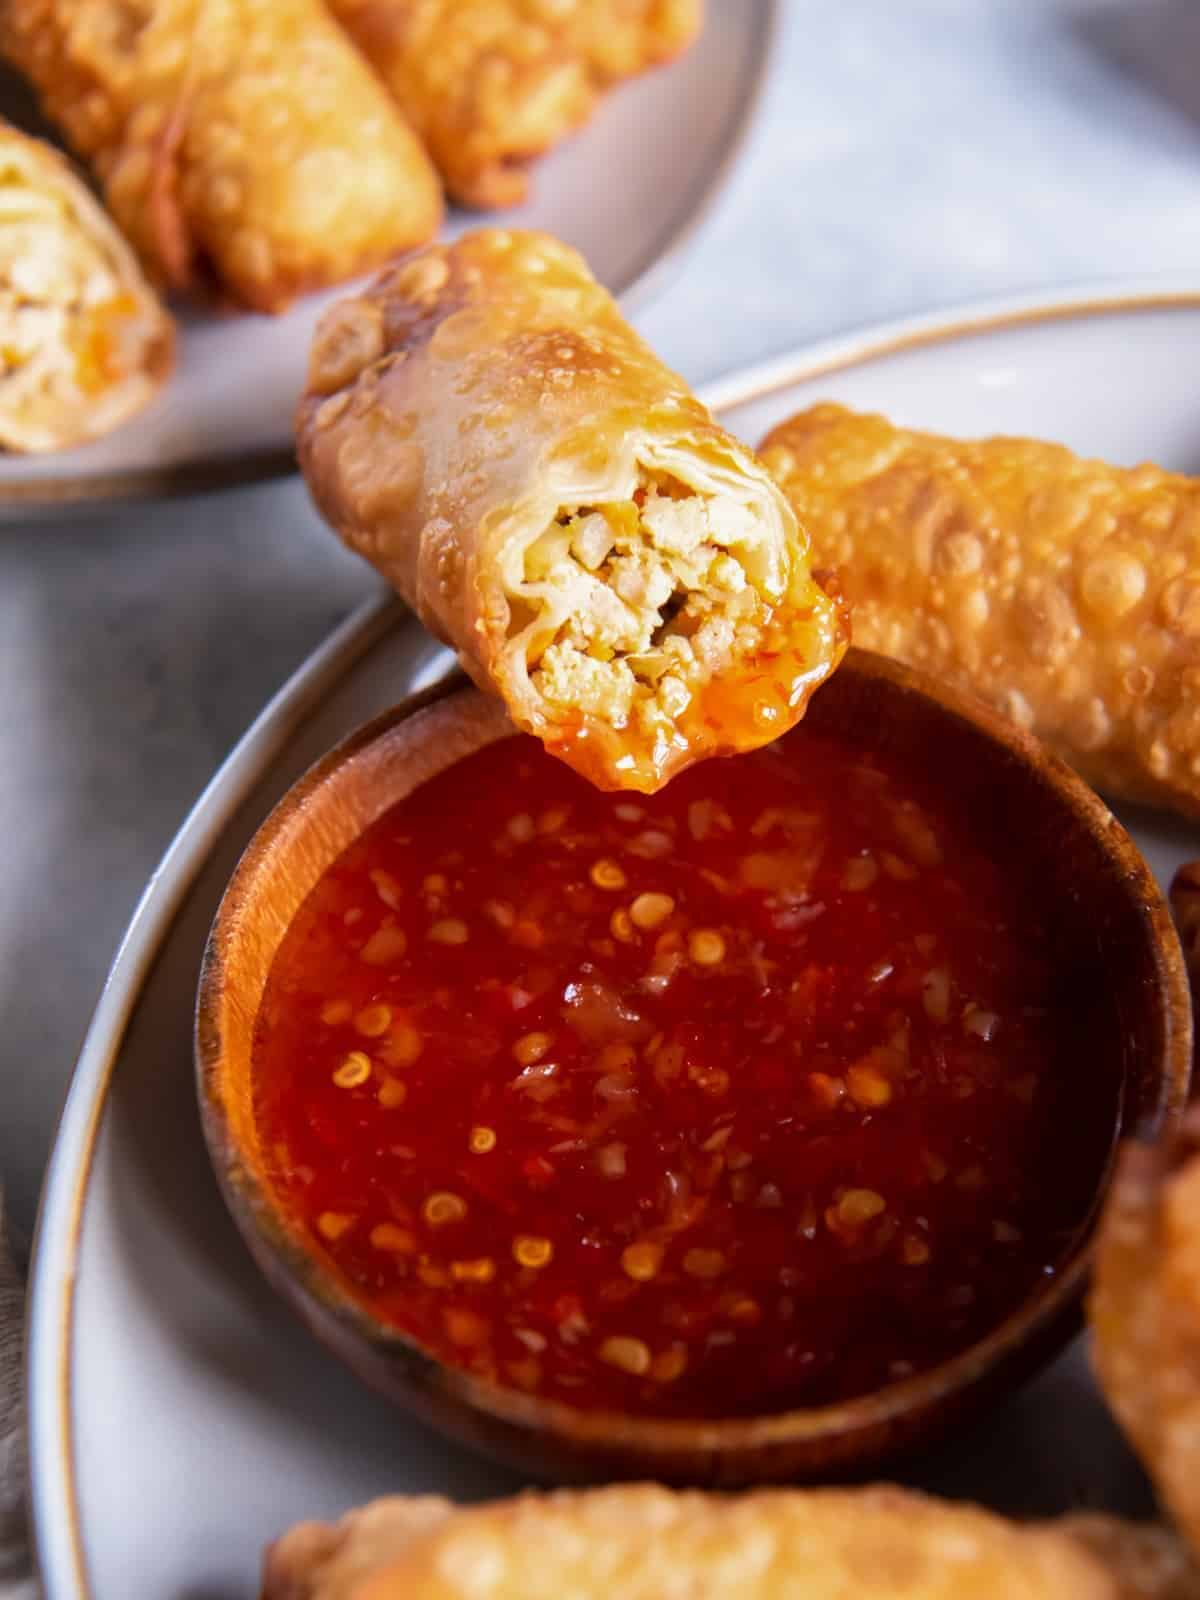 egg rolls dipped in sauce